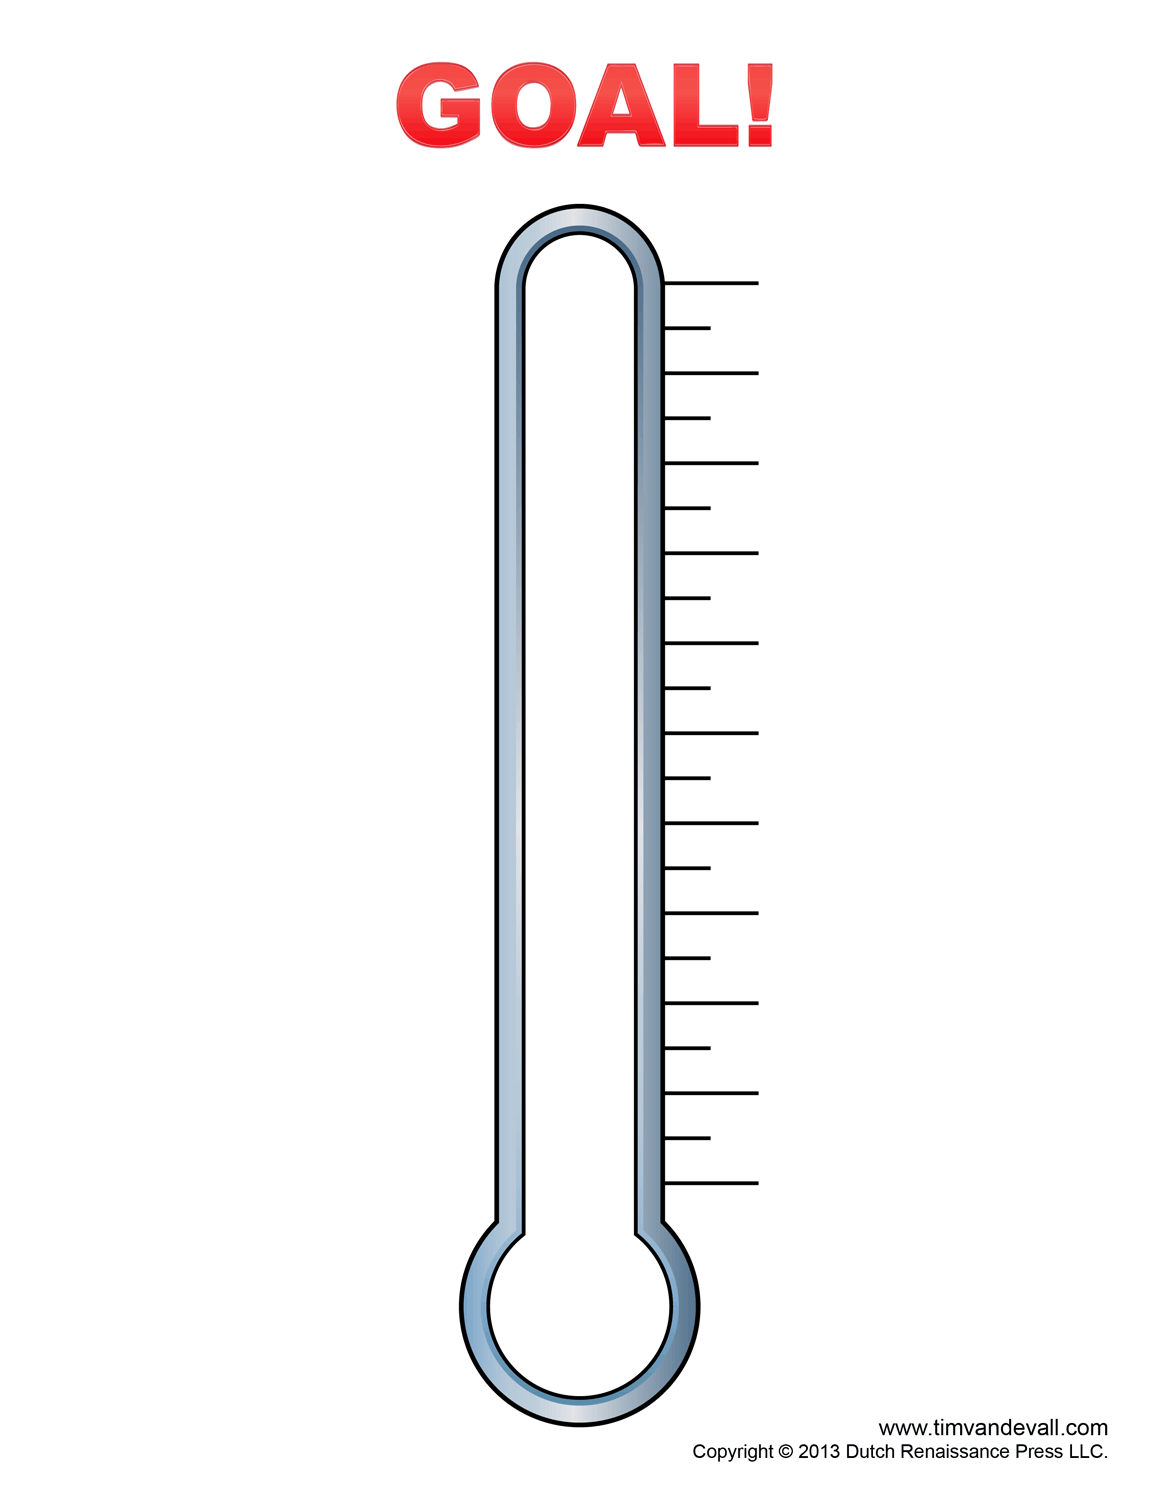 Blank Goal Fundraising Thermometer Template